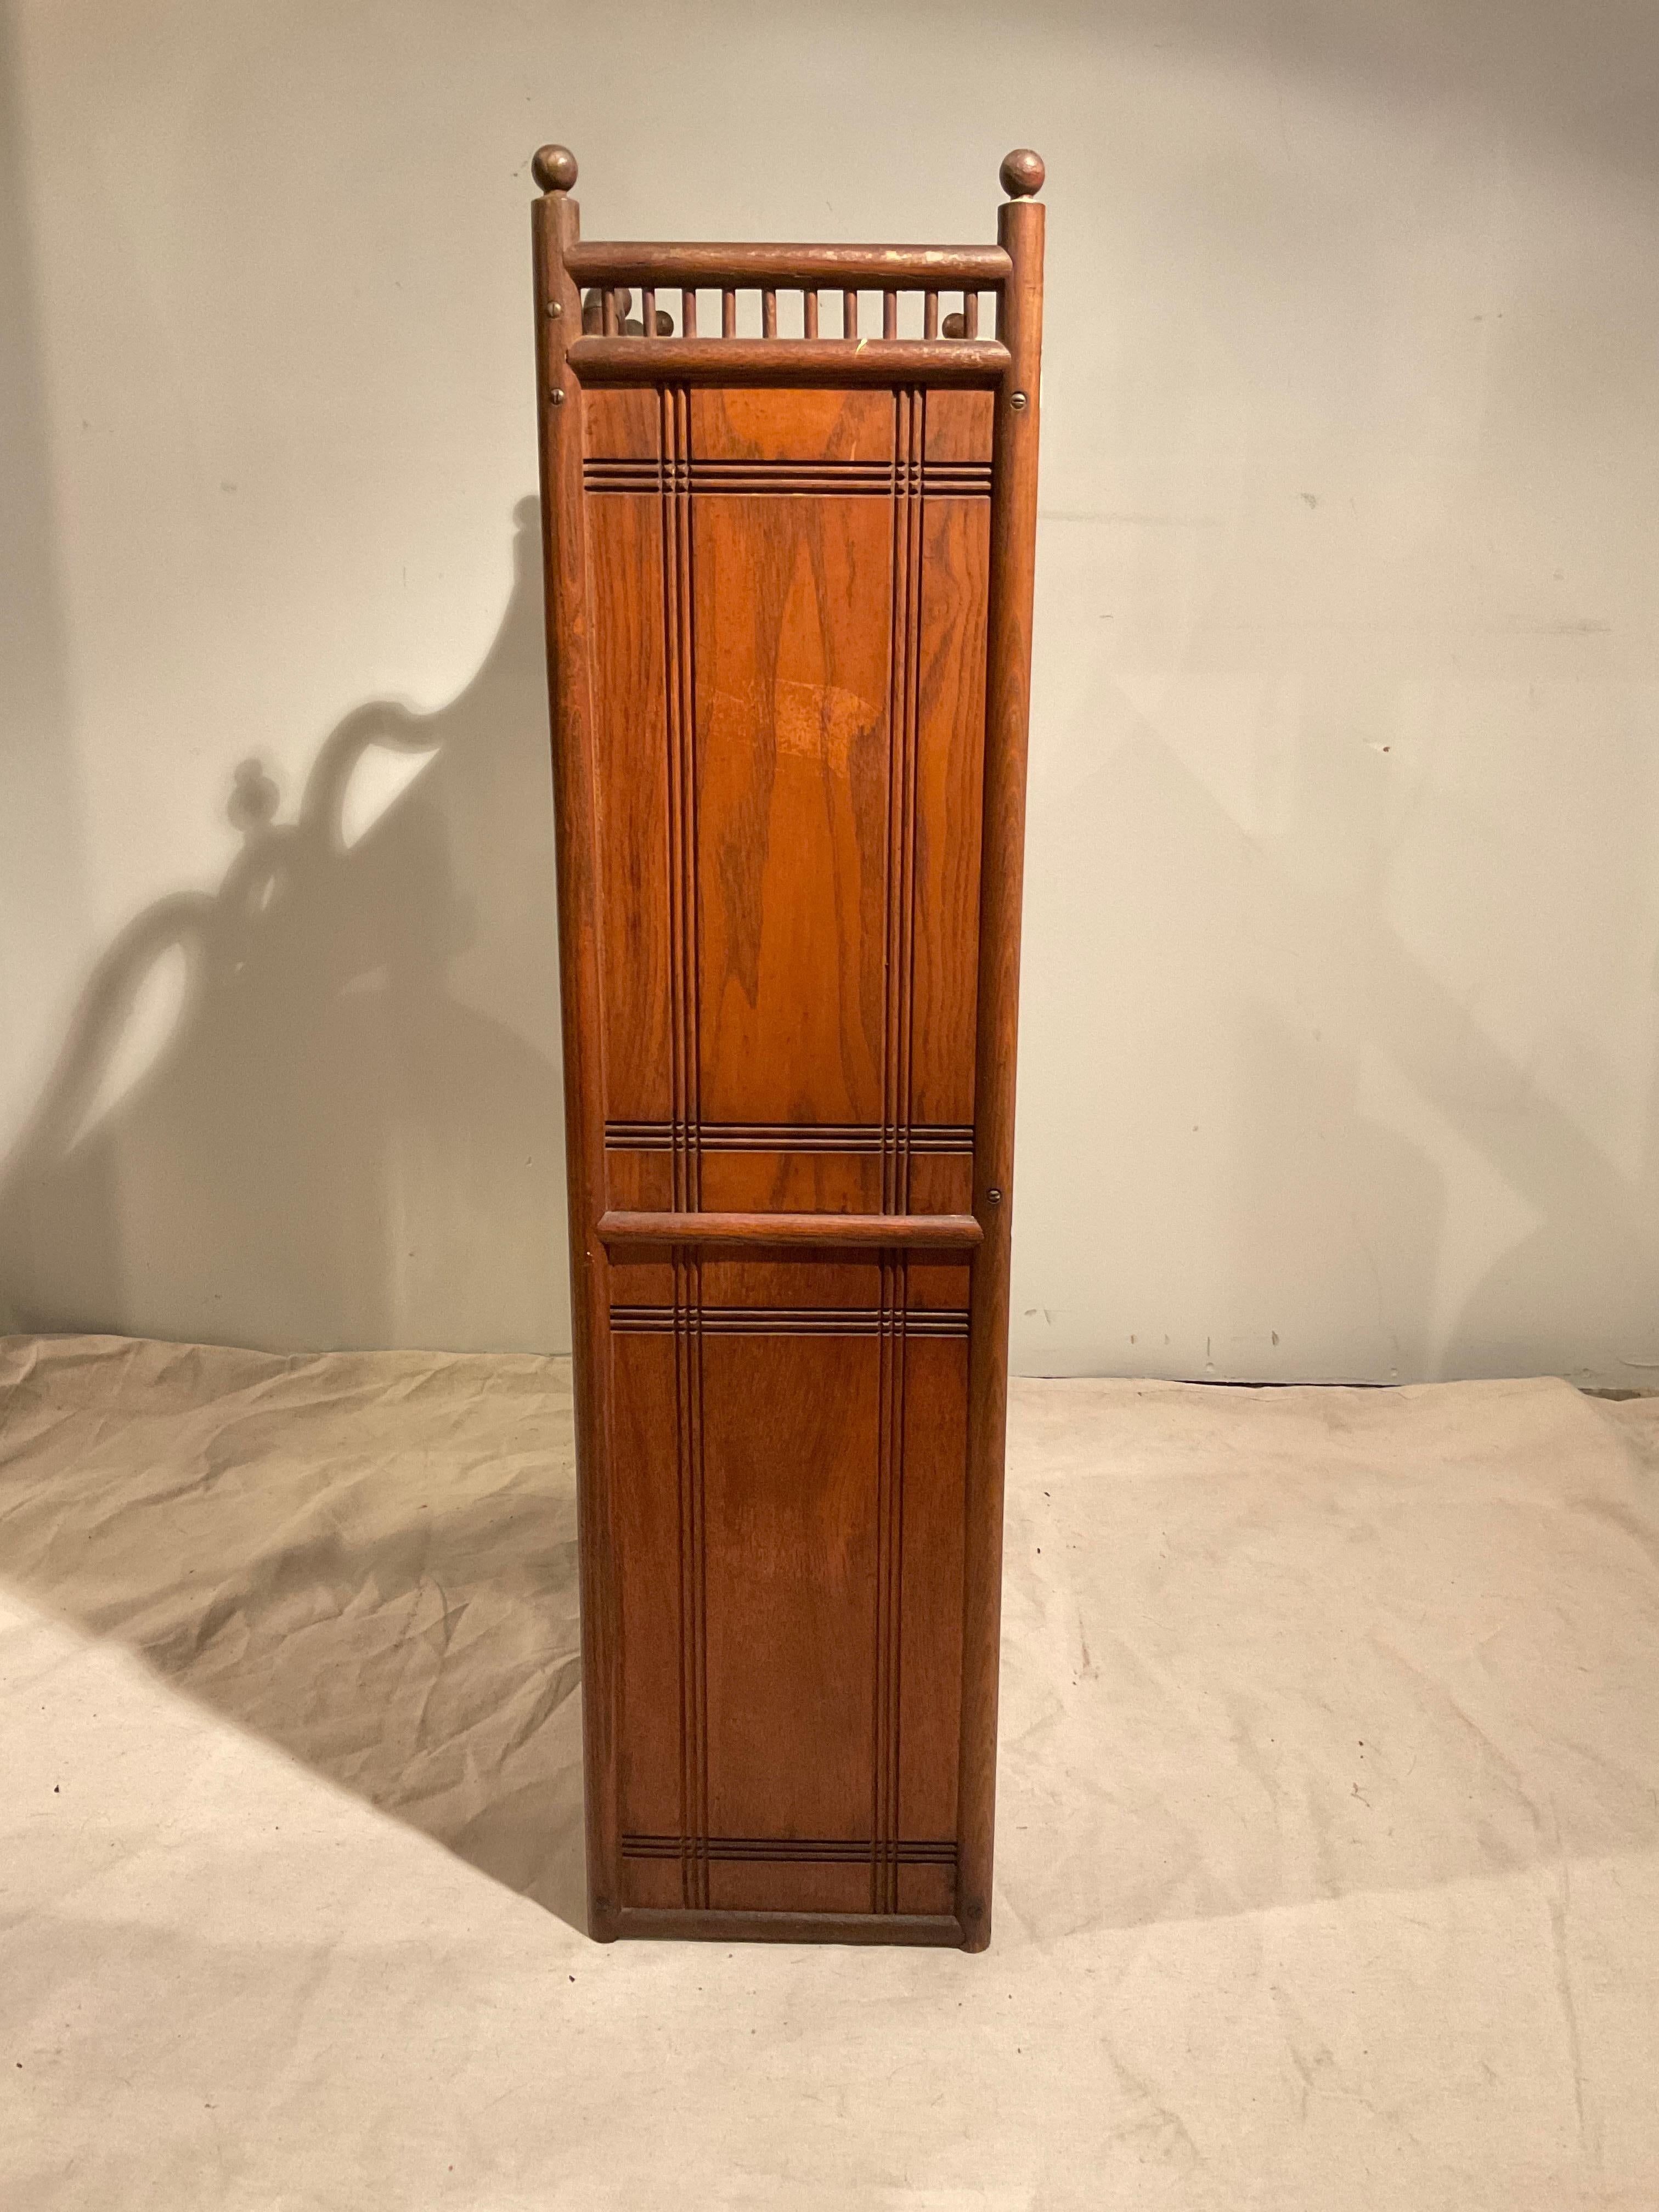 1900 Folk Art Display Cabinet In Good Condition For Sale In Tarrytown, NY